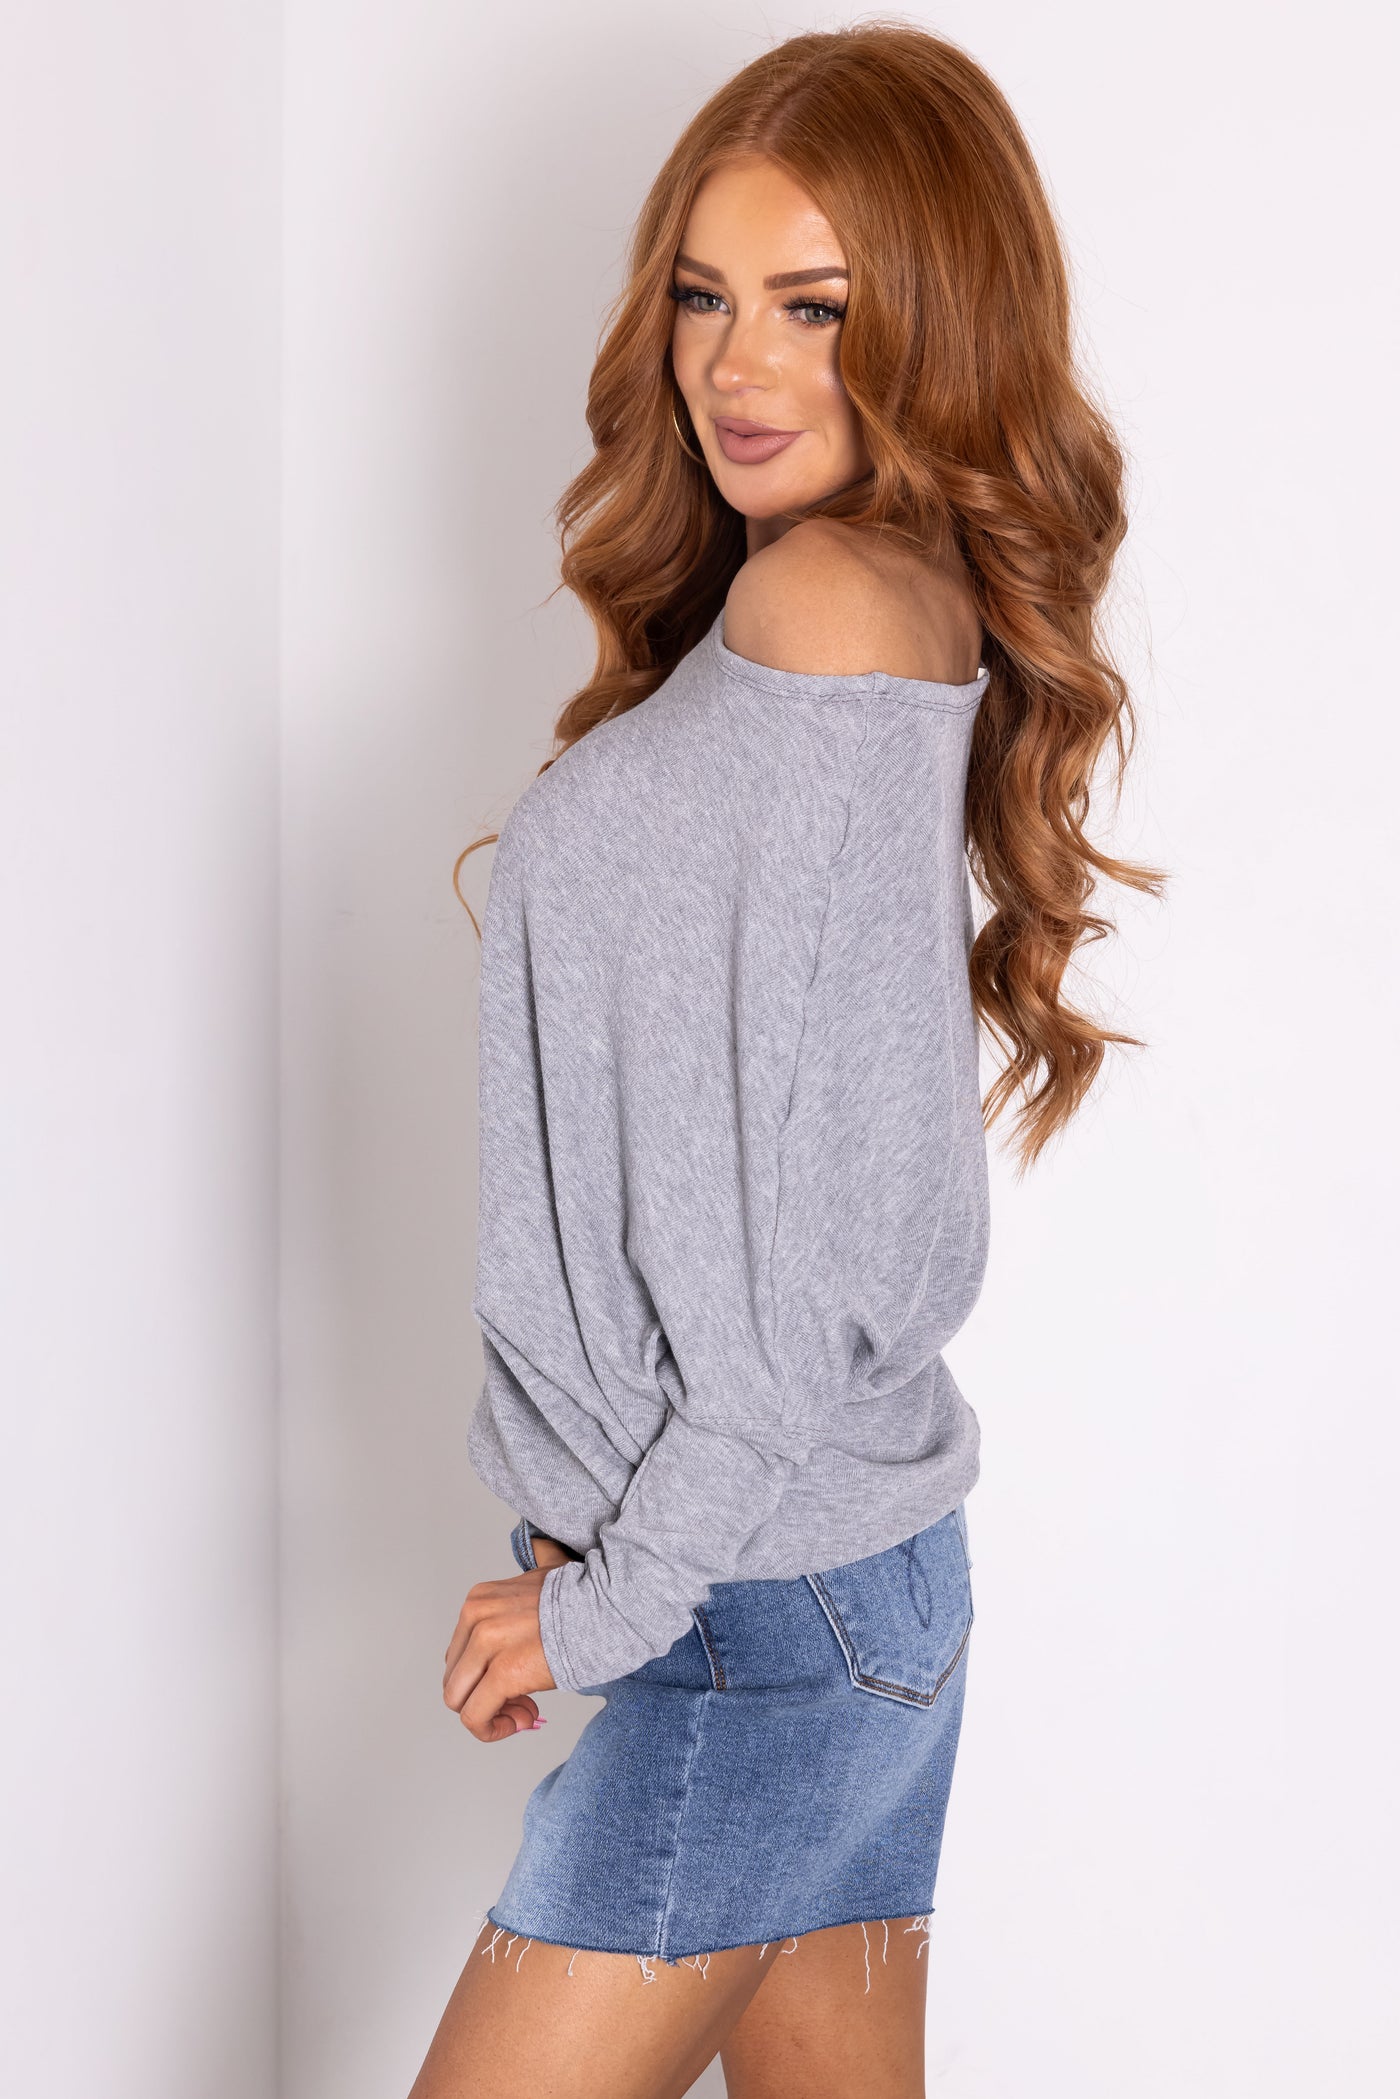 Heathered Grey Round Neck Knit Top with Long Dolman Sleeves